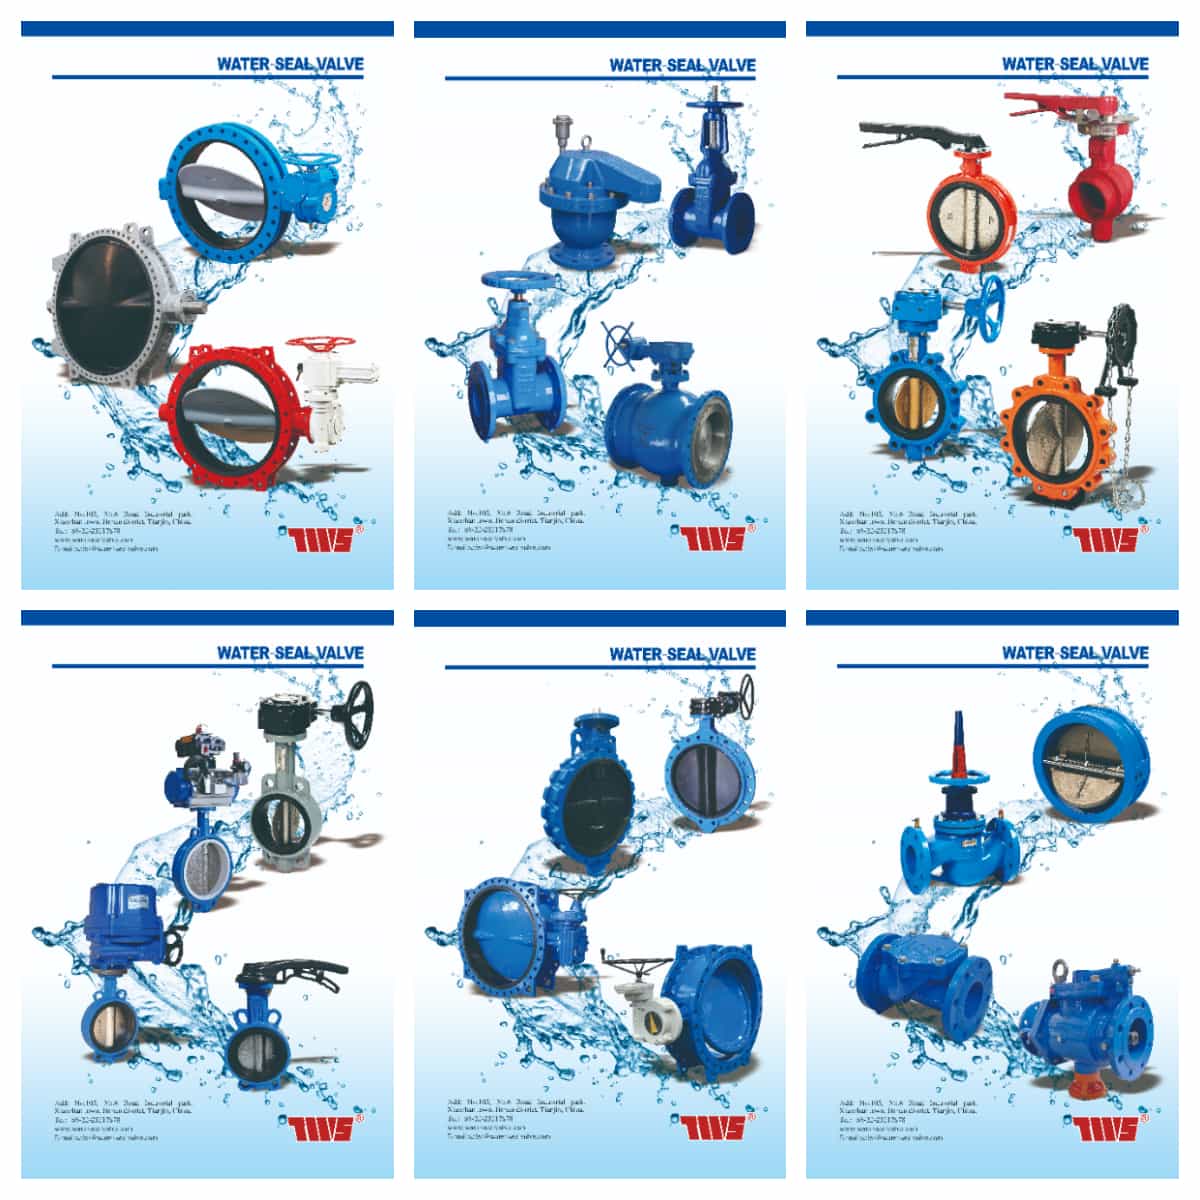 Butterfly valves have a wide range of uses, do you know all of these applications?